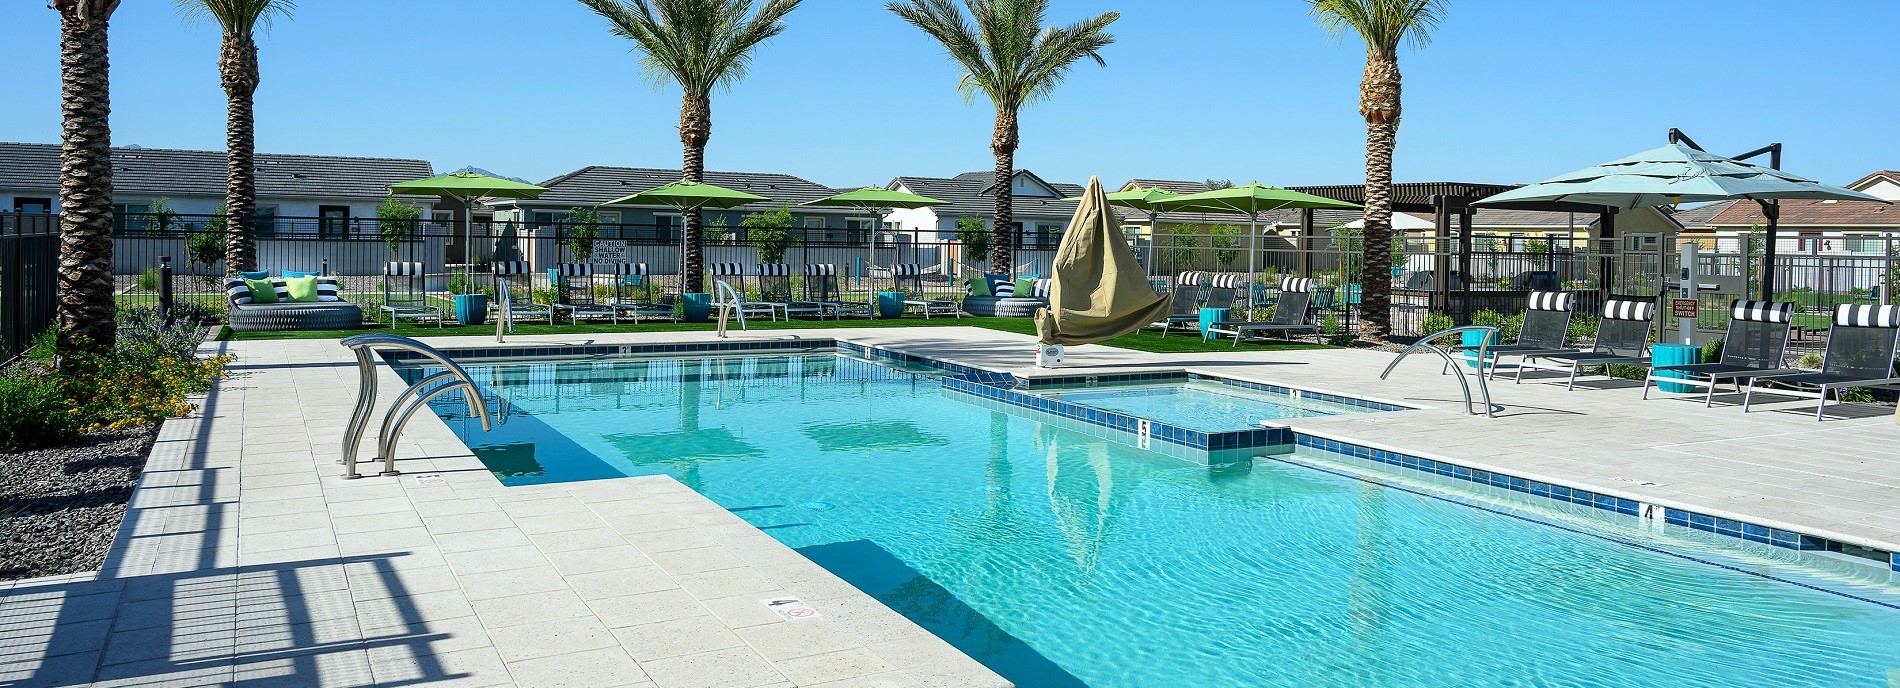 Village at the BLVD with Resort-style Swimming Pool